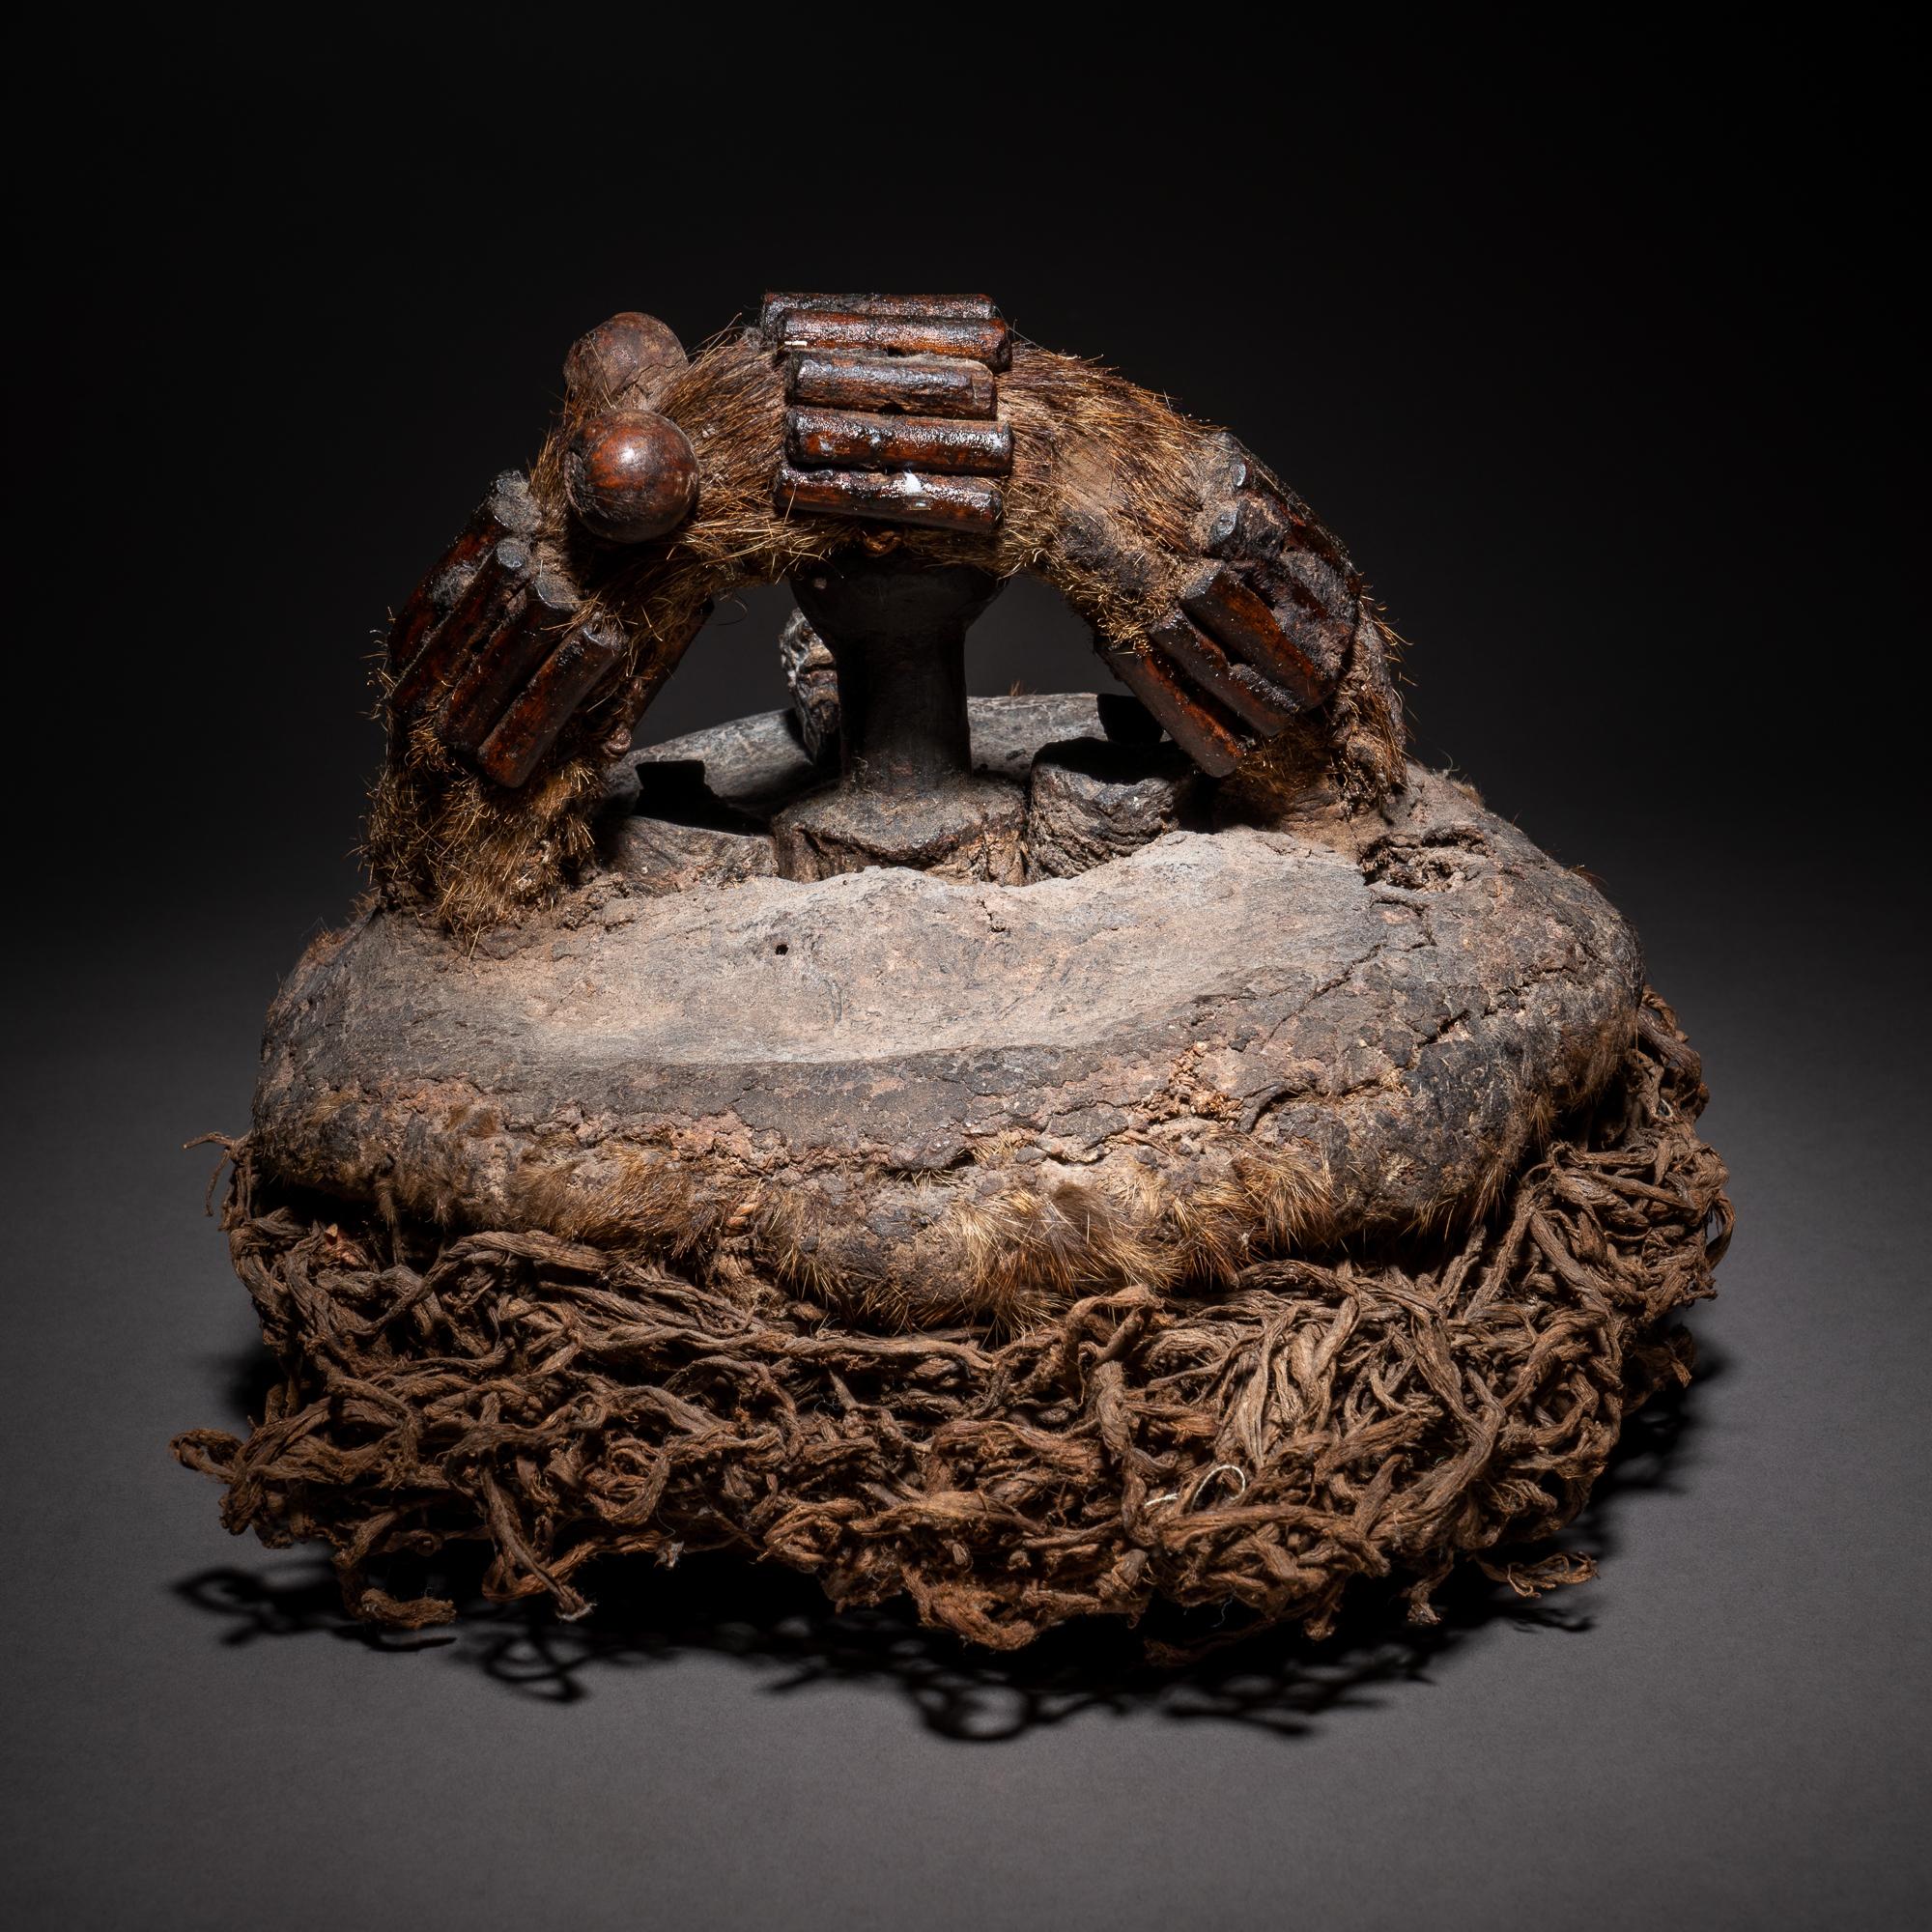 19th Century Late 19th or Early 20th Century Tribal Luba Divination Basket, D.R. Congo